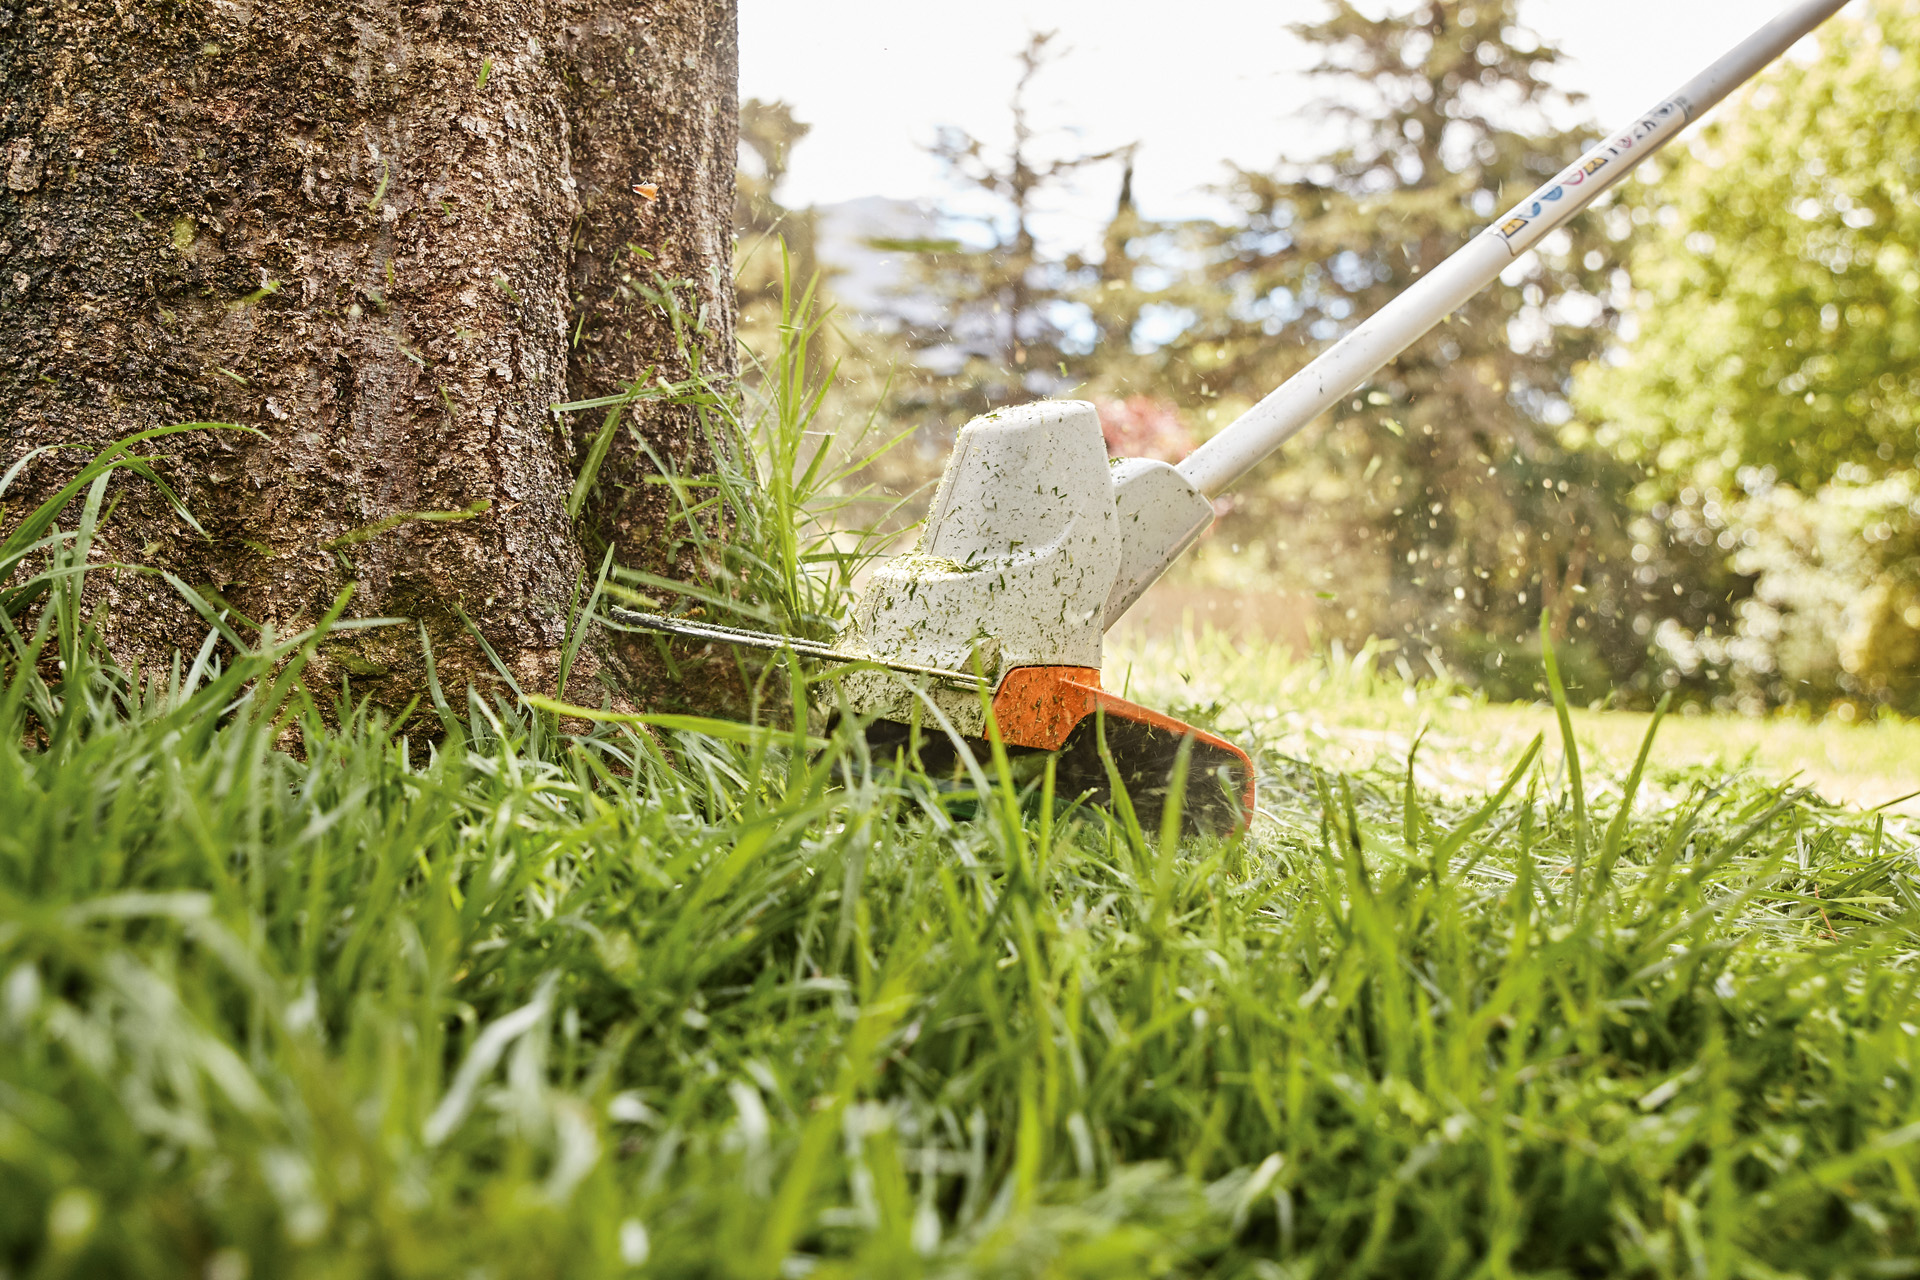 Grass at the base of a tree being trimmed with a STIHL FS 57 cordless clearing saw